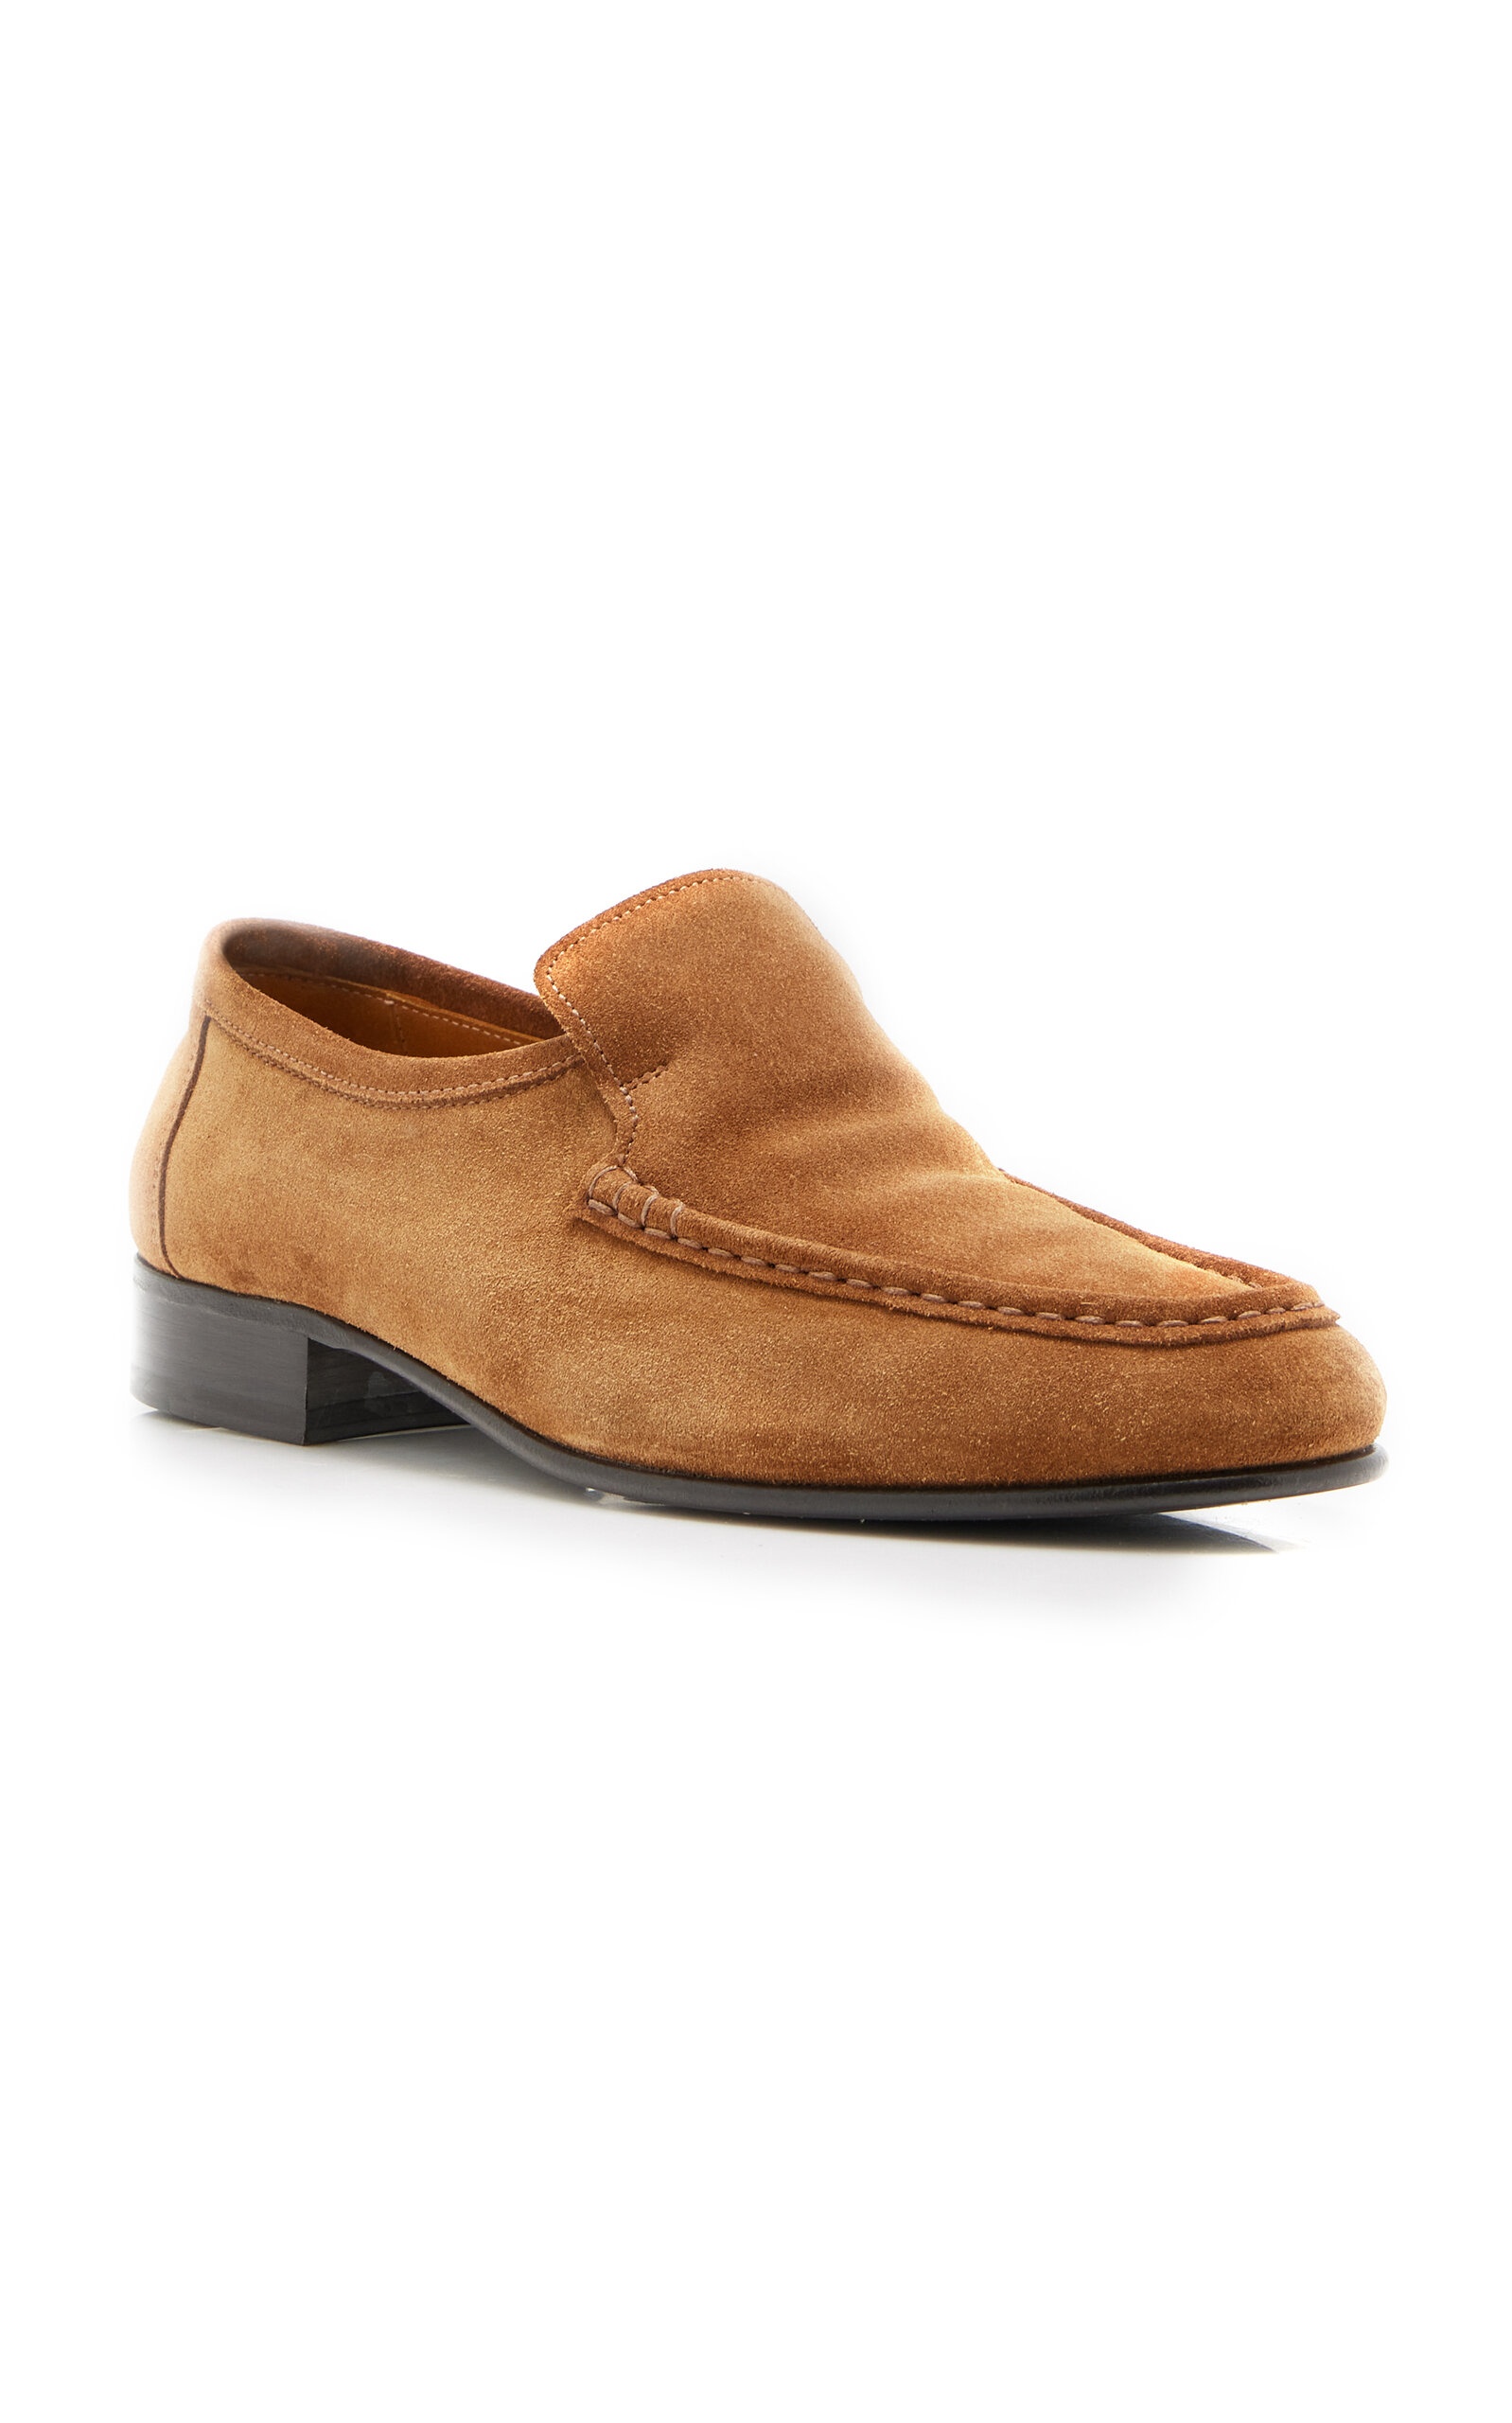 New Soft Suede Loafers tan - 4